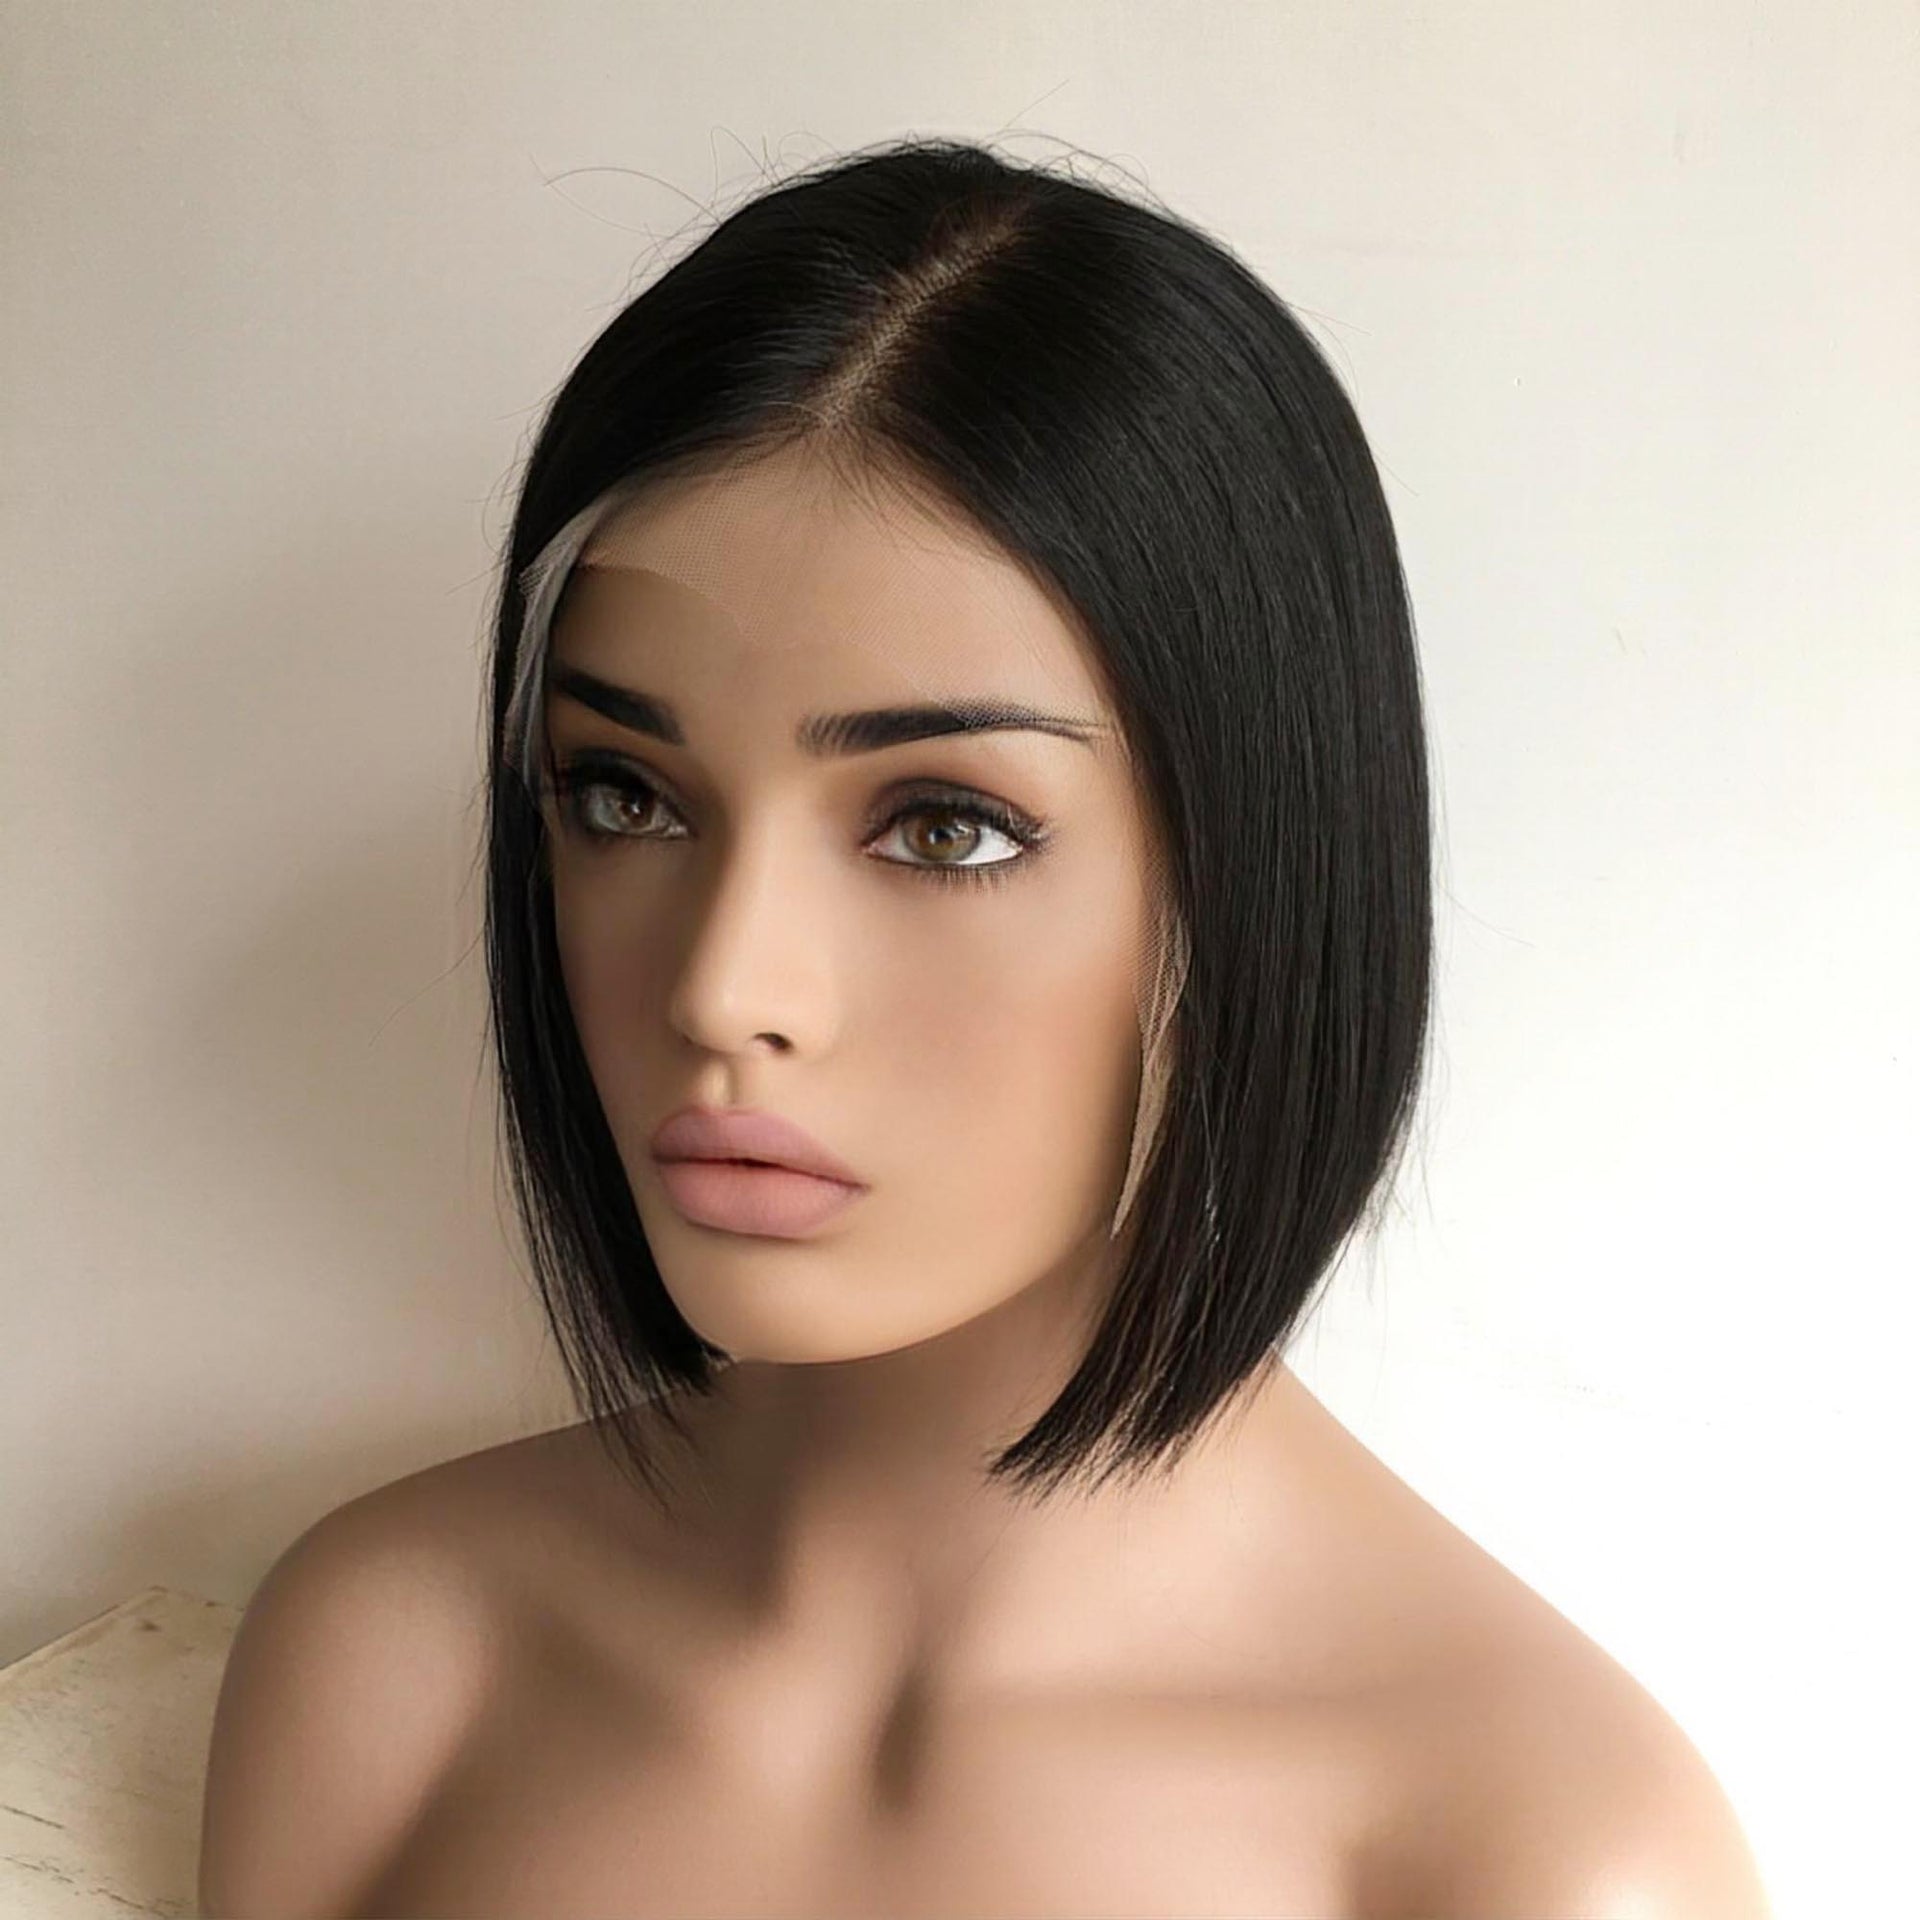 nevermindyrhead Women Natural Black Human Hair 13X6 Lace Front Short Bob Straight Side Part Wig 8 Inches